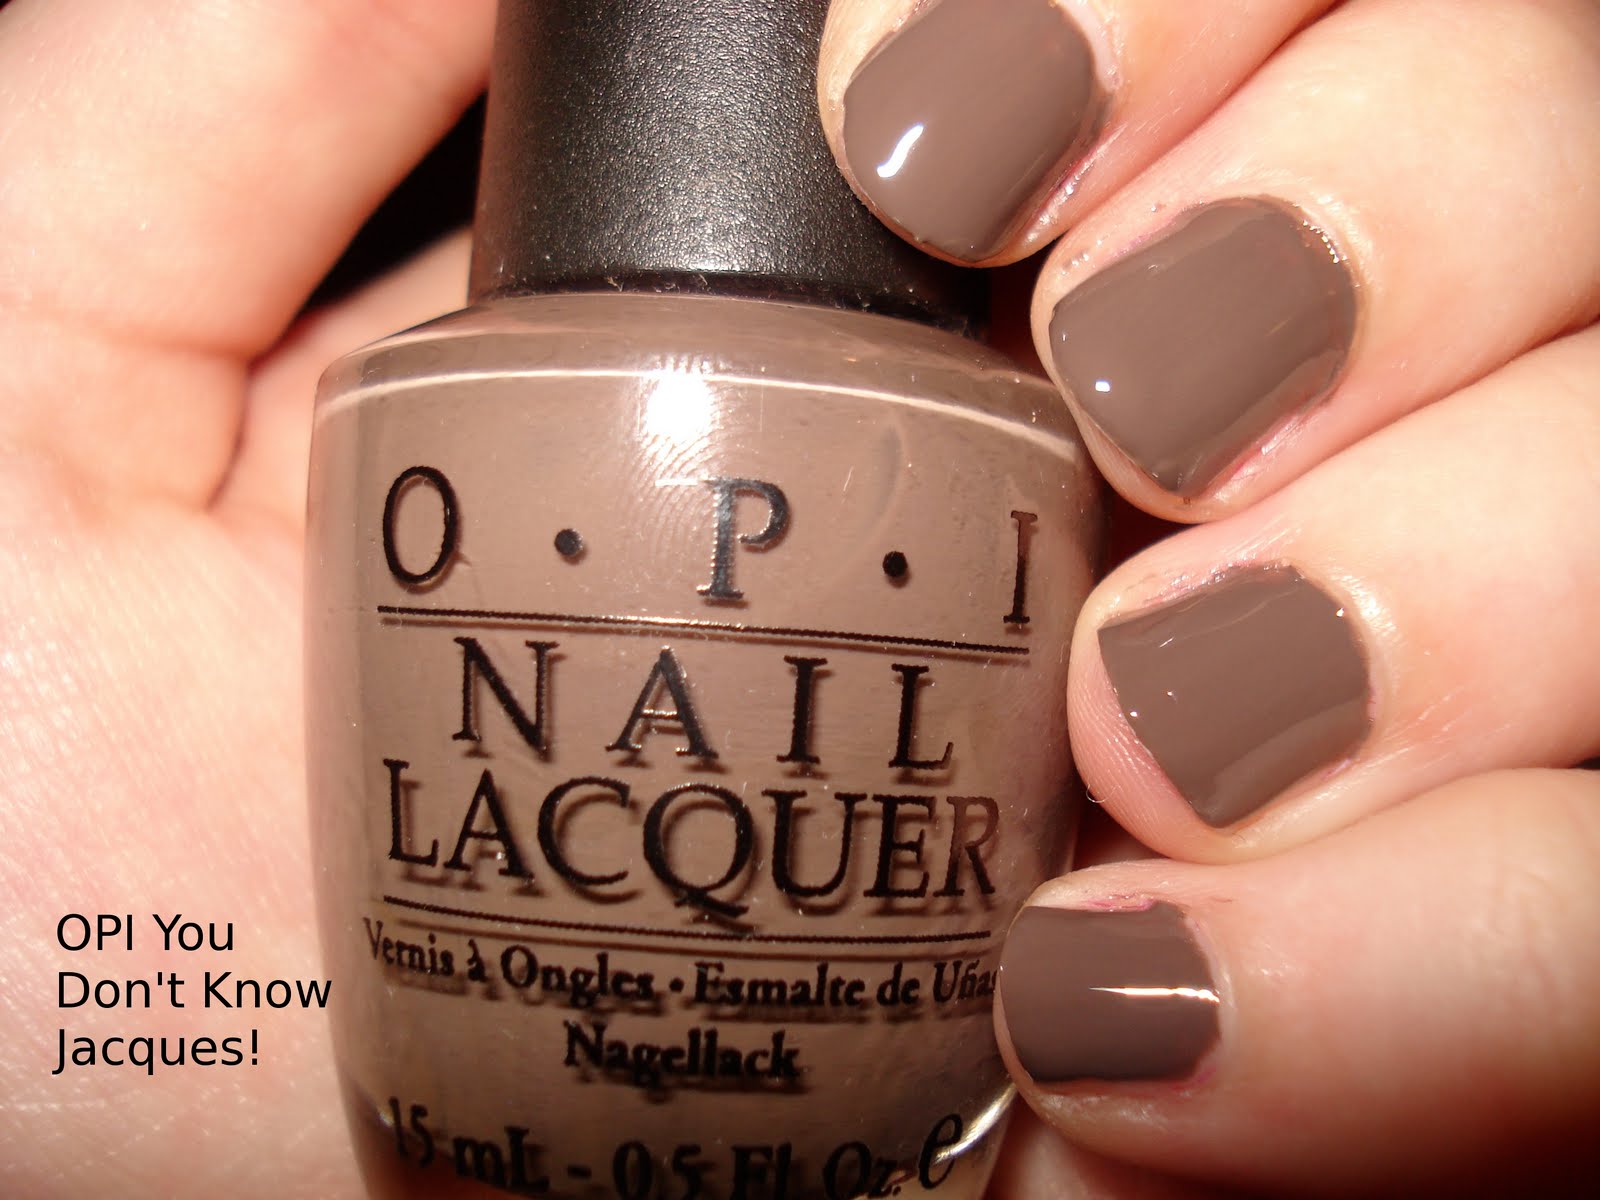 2. OPI Nail Lacquer in "You Don't Know Jacques!" - wide 6